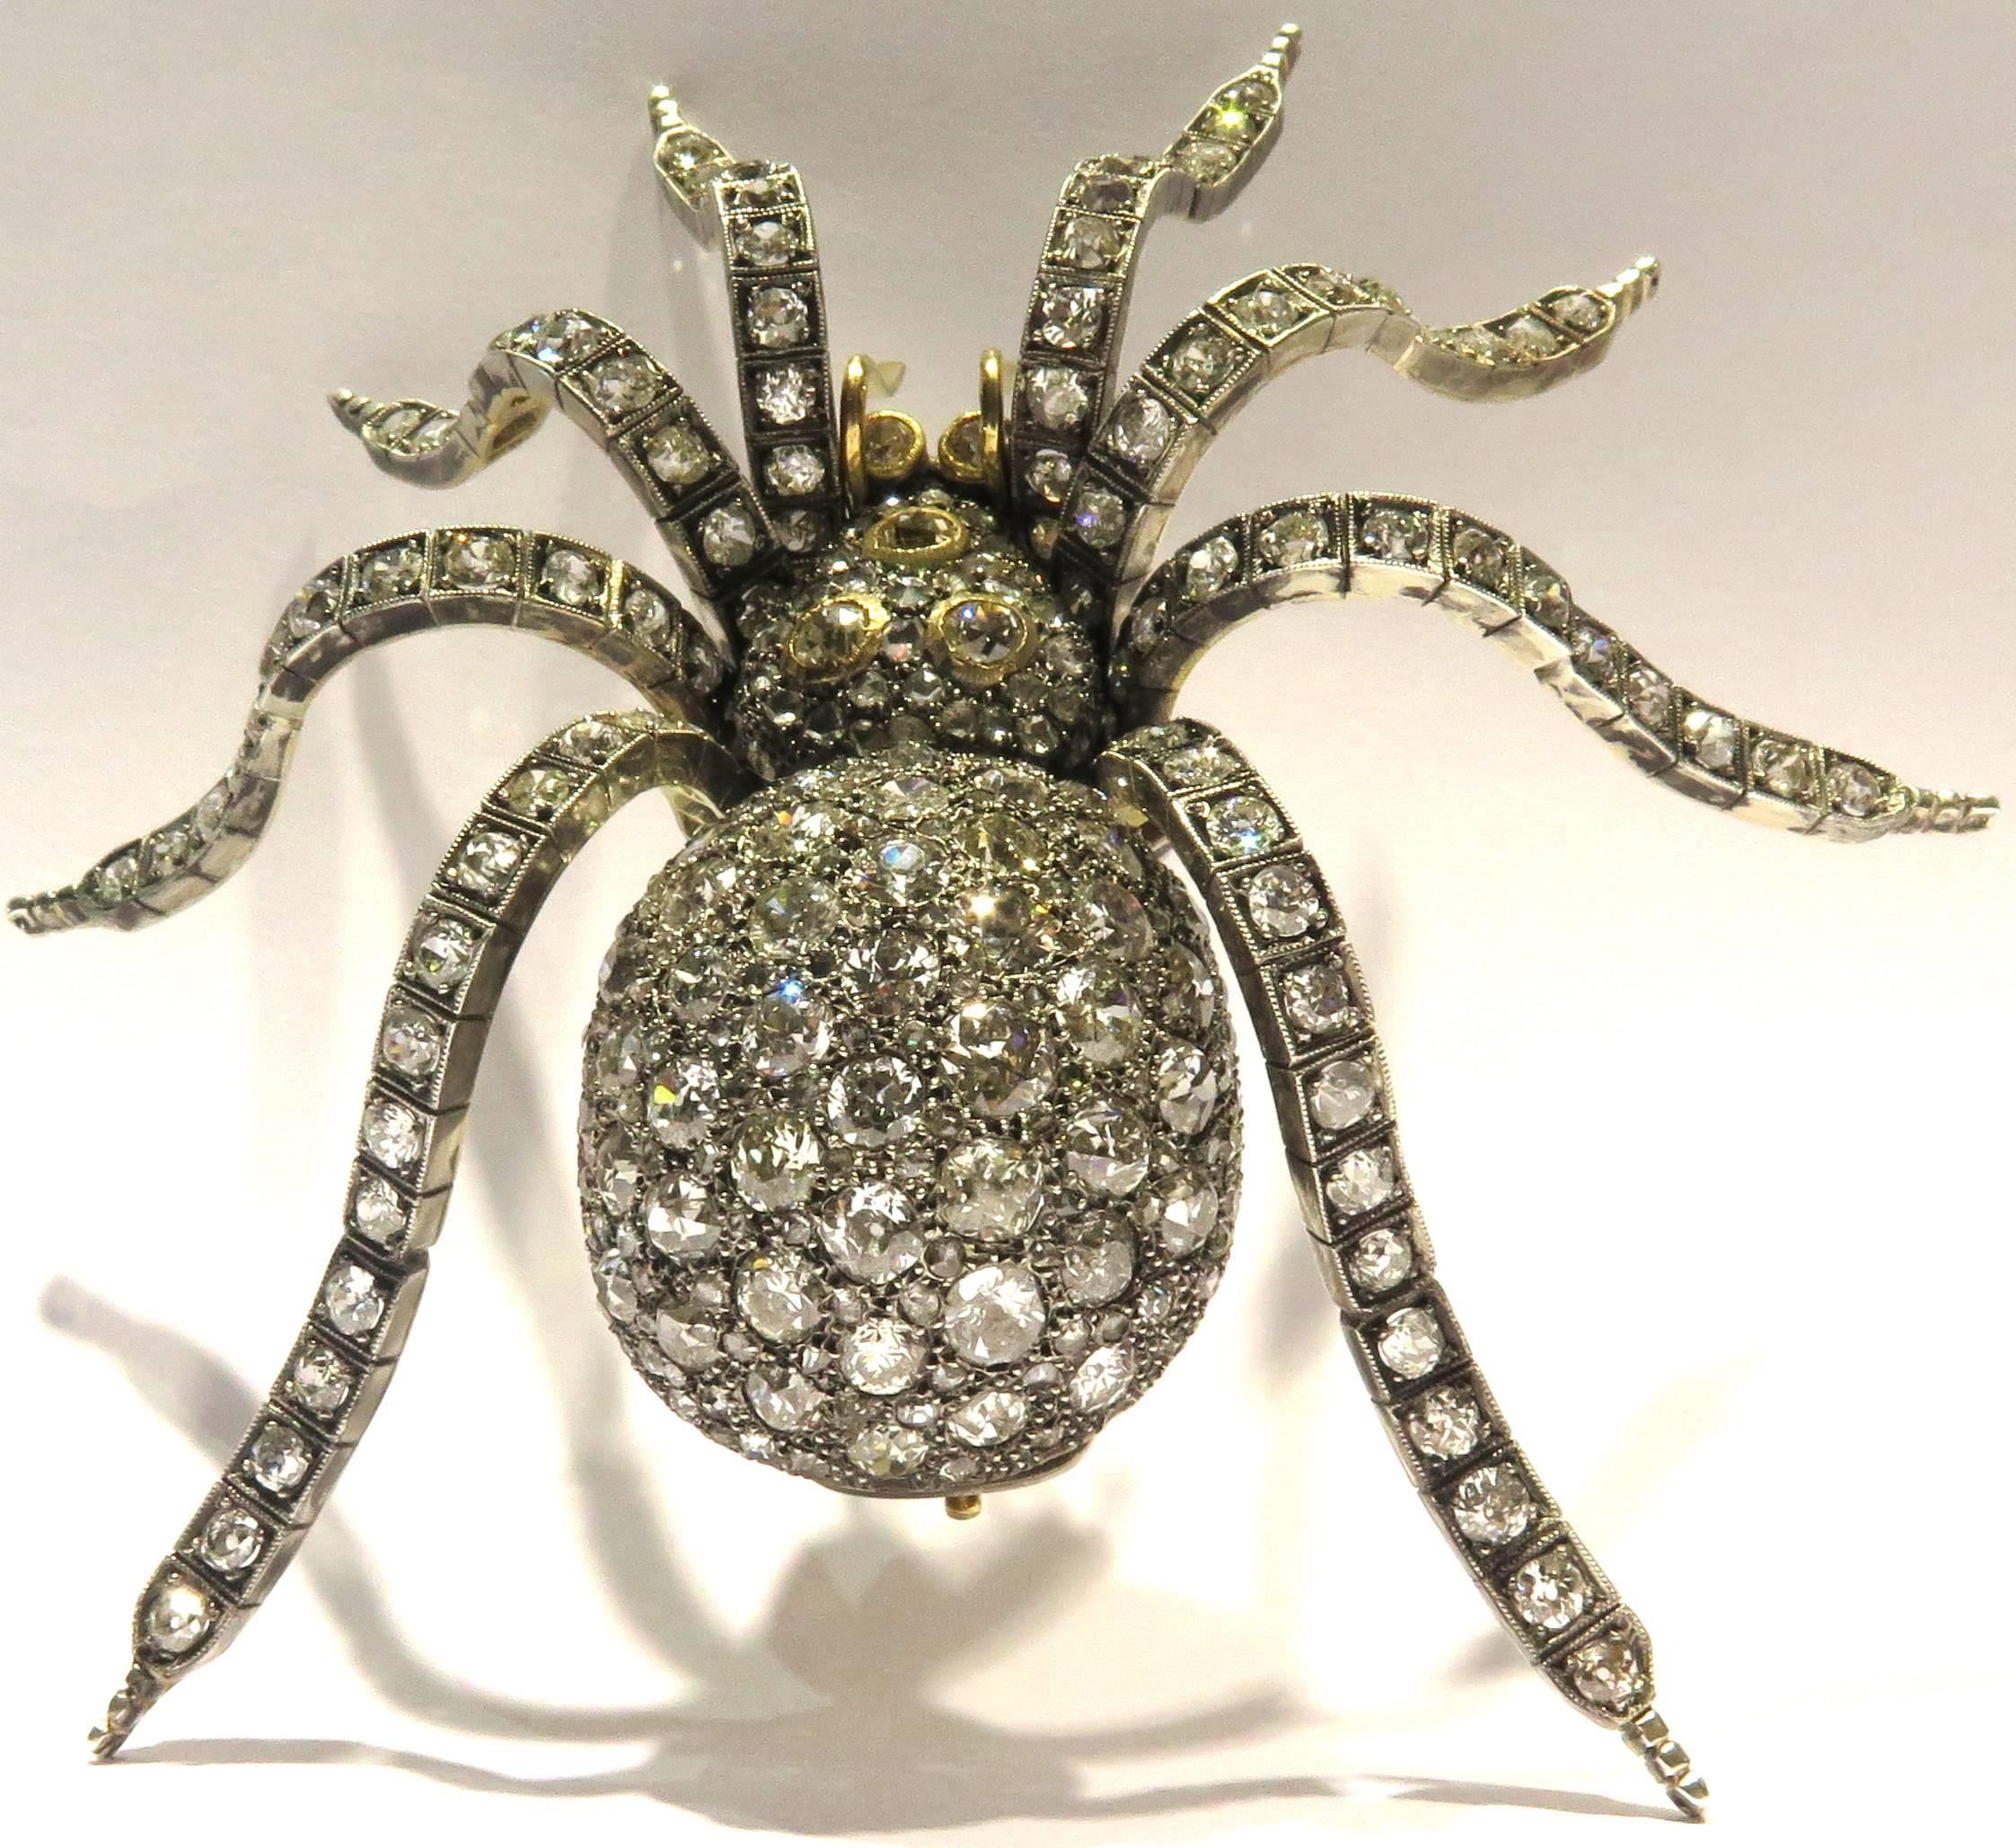 Magnificent XtraLarge Spider Pin 5 5/8 in 43cts Diamonds Gold SilverTremblant c 3